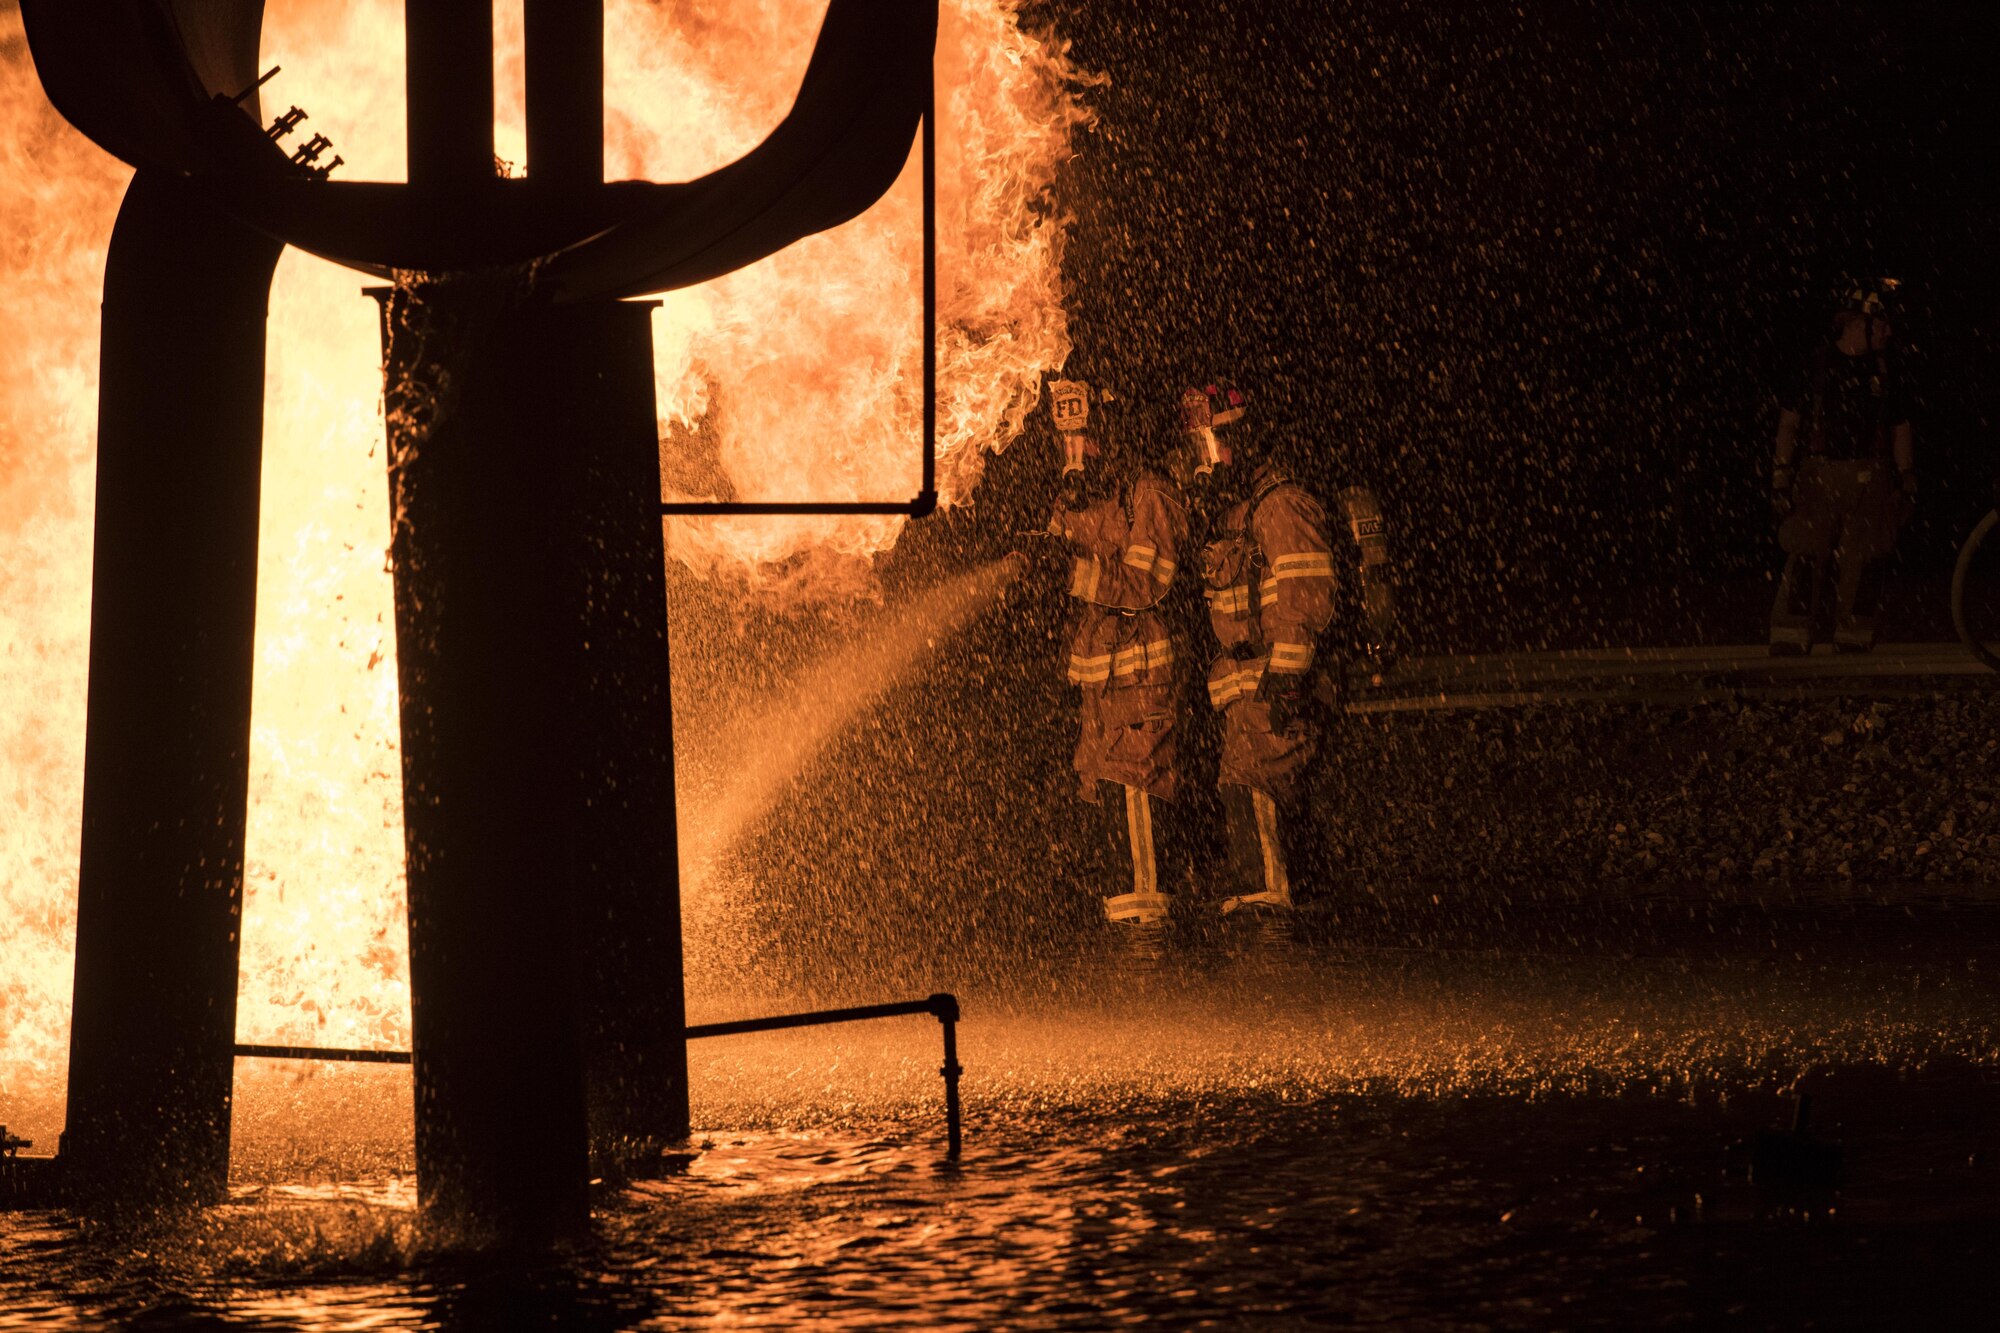 Firefighters from Moody Air Force Base, Ga. put out a blaze during nighttime live-fire training, Nov. 9, 2017, at Moody AFB, Ga. This training prepares participants for the possibility of nighttime aircraft fire operations. (U.S. Air Force photo by Senior Airman Janiqua P. Robinson)